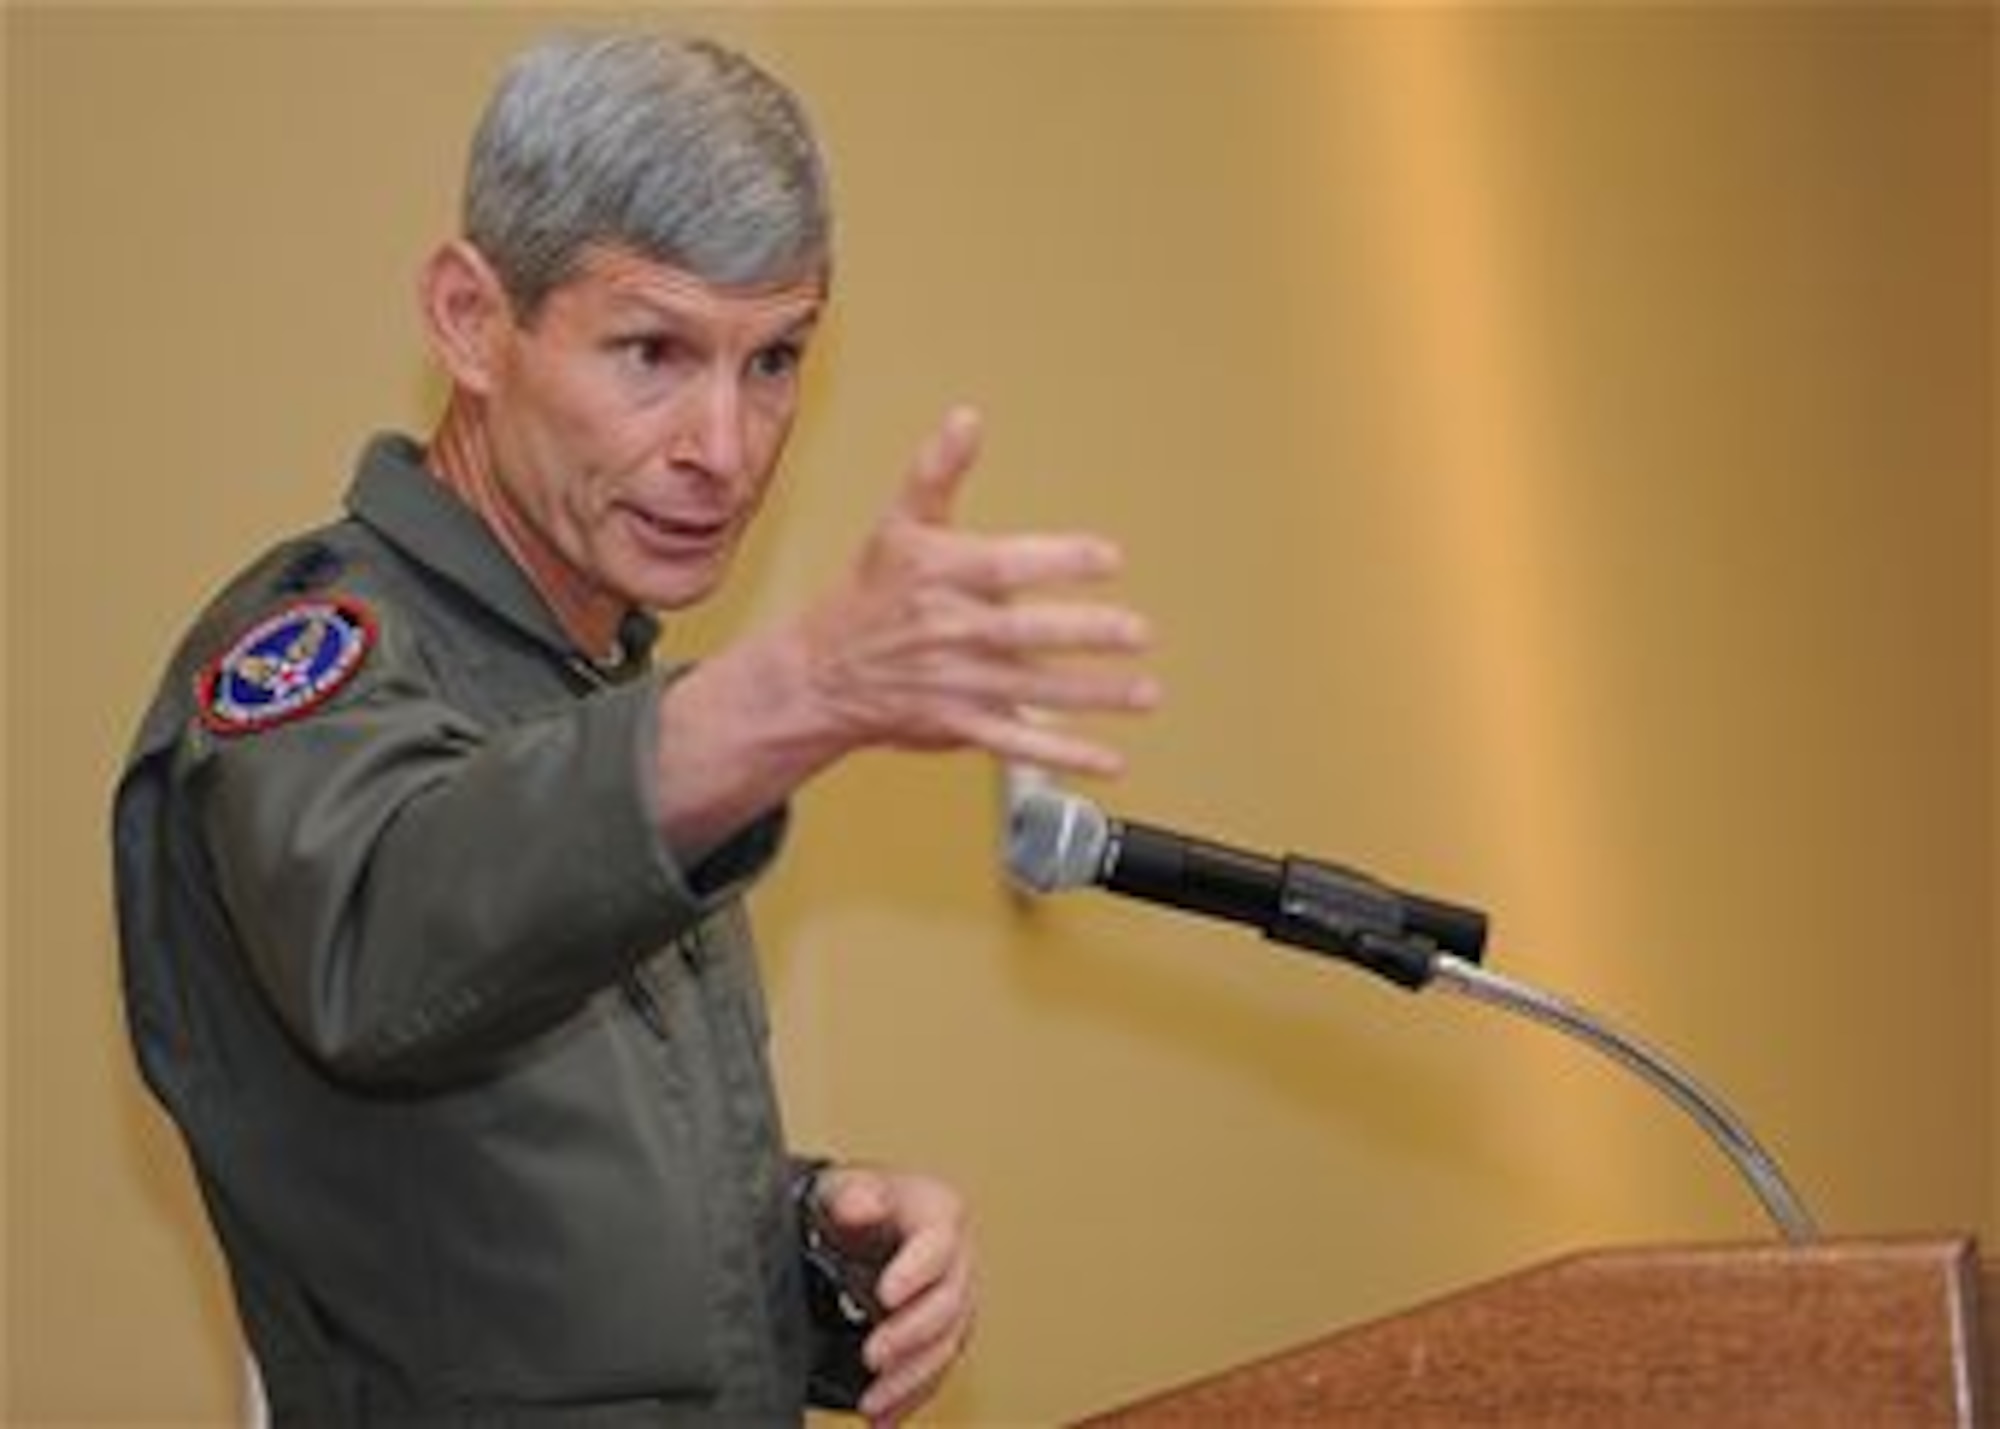 Air Force Chief of Staff Gen. Norton Schwartz speaks to members of the Air Force Association and the Air Commando Association at Hurlburt Field, Fla., July 12, 2012. Schwartz visited the base to meet with Air Force Special Operations Command leaders and airmen. During the visit, he flew his last flight as an active duty officer on an MC-130E Combat Talon I. The MC-130E crew conducted a local training sortie during the mission. It also served as Schwartz's "fini flight" in the Air Force. (U.S. Air Force photo/Airman 1st Class Christopher Williams)